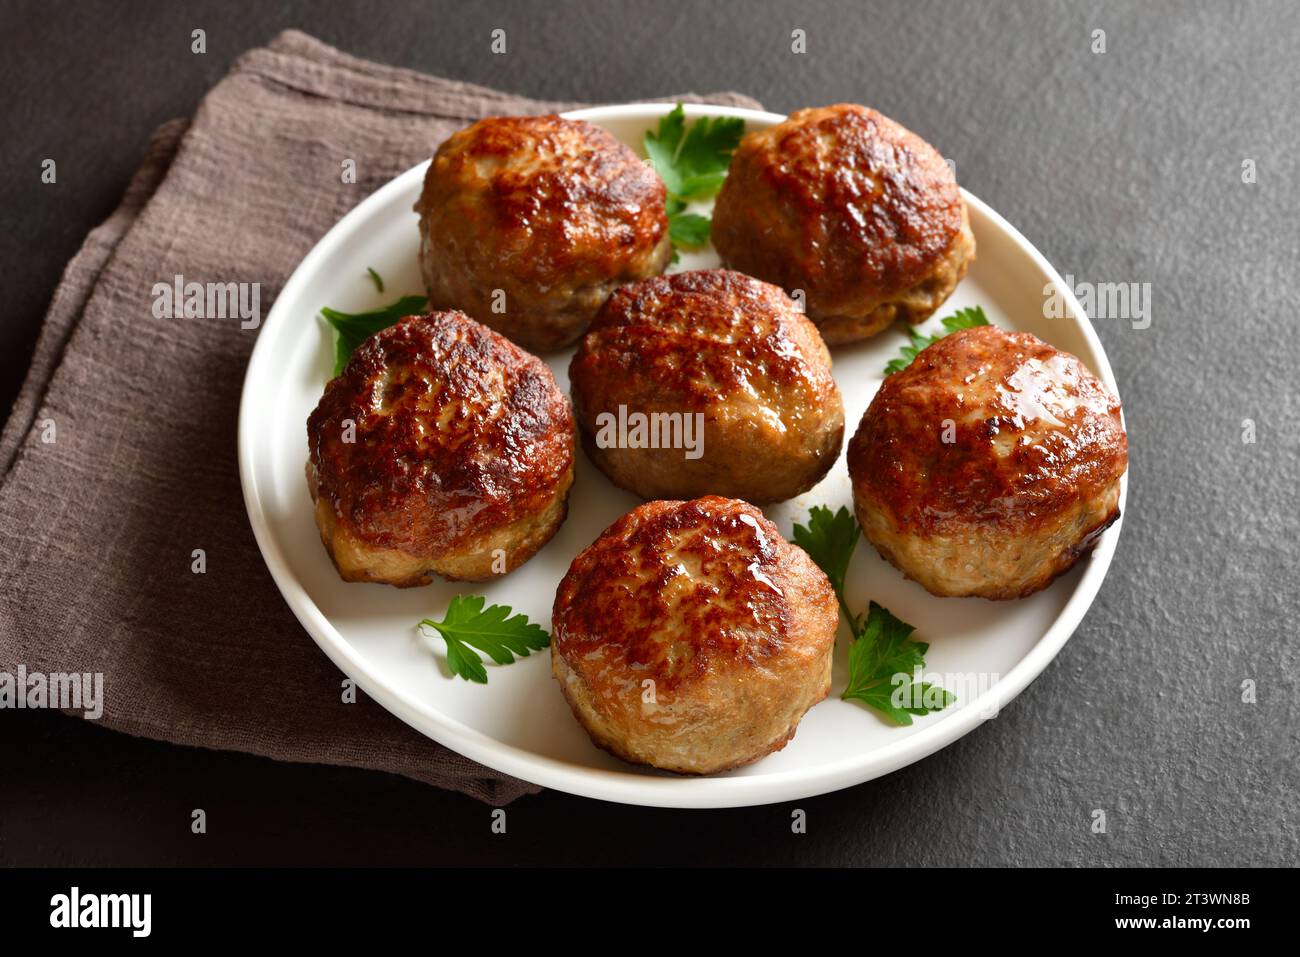 Homemade cutlets from minced meat on plate over dark background. Close up view Stock Photo